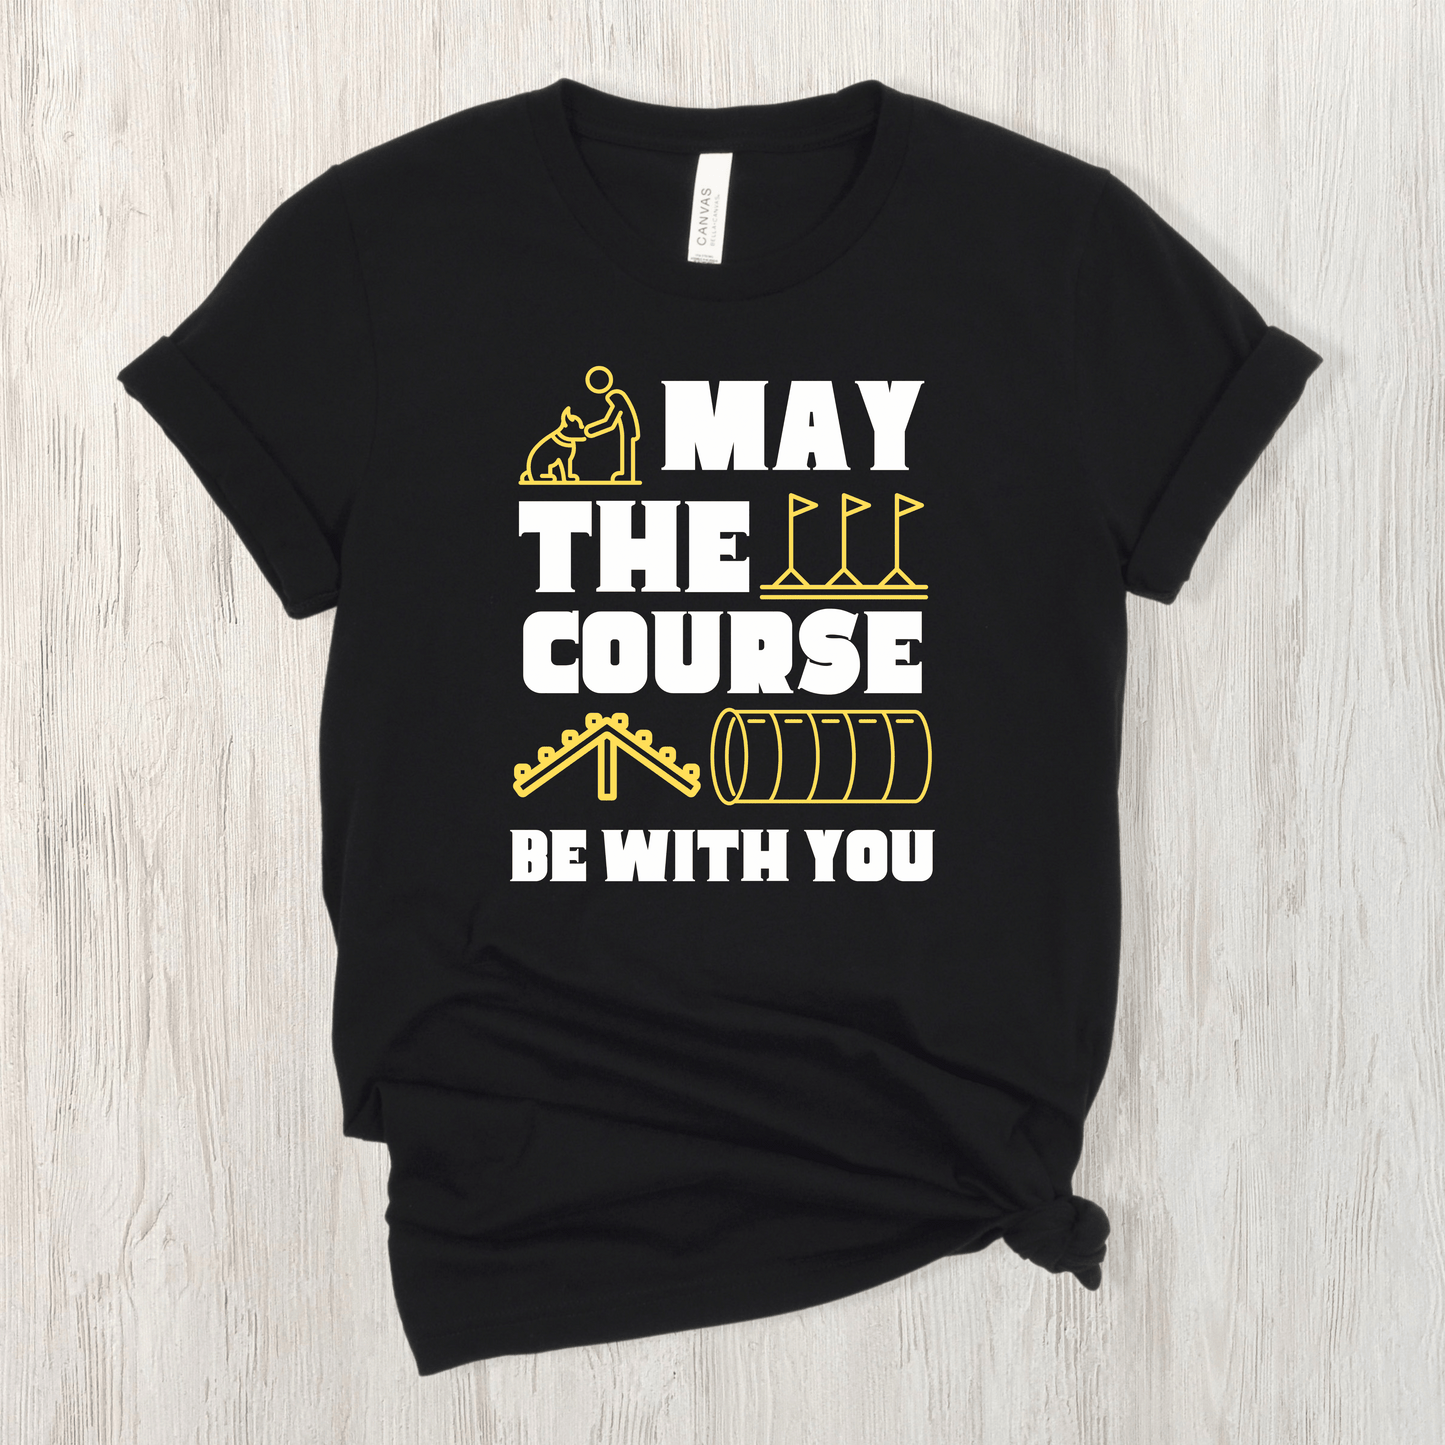 Black tee featuring the text "May The Force Be With You" as well as agility related images.